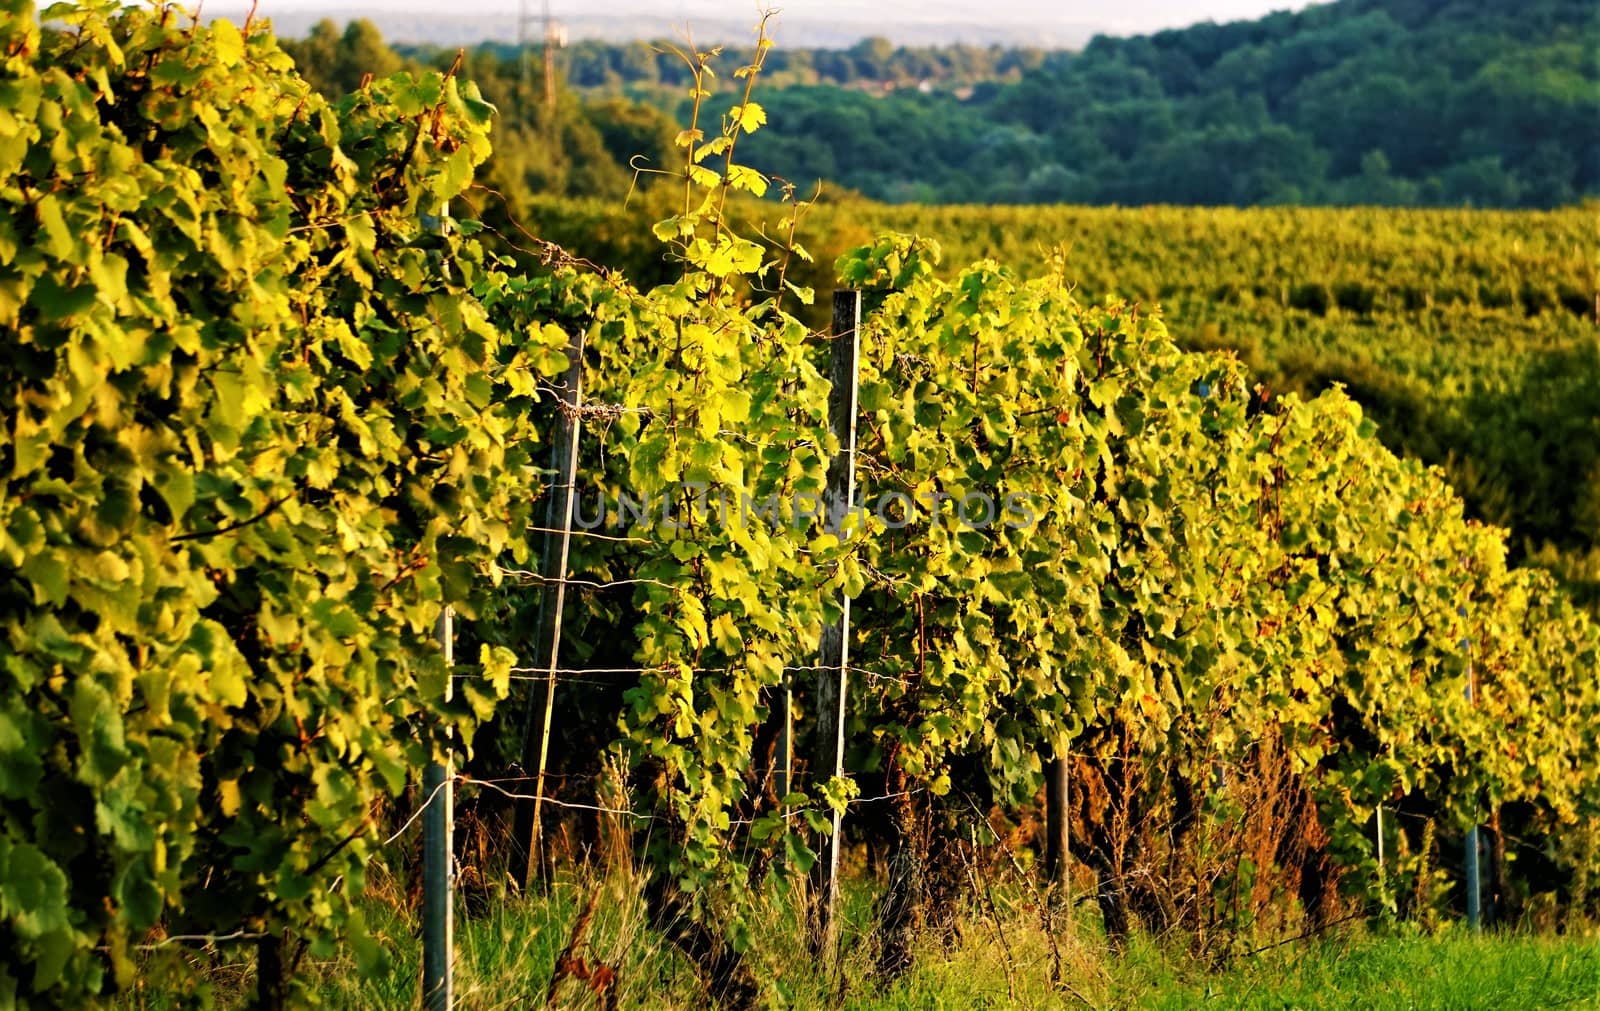 Vineyard in front of a hill in Germany